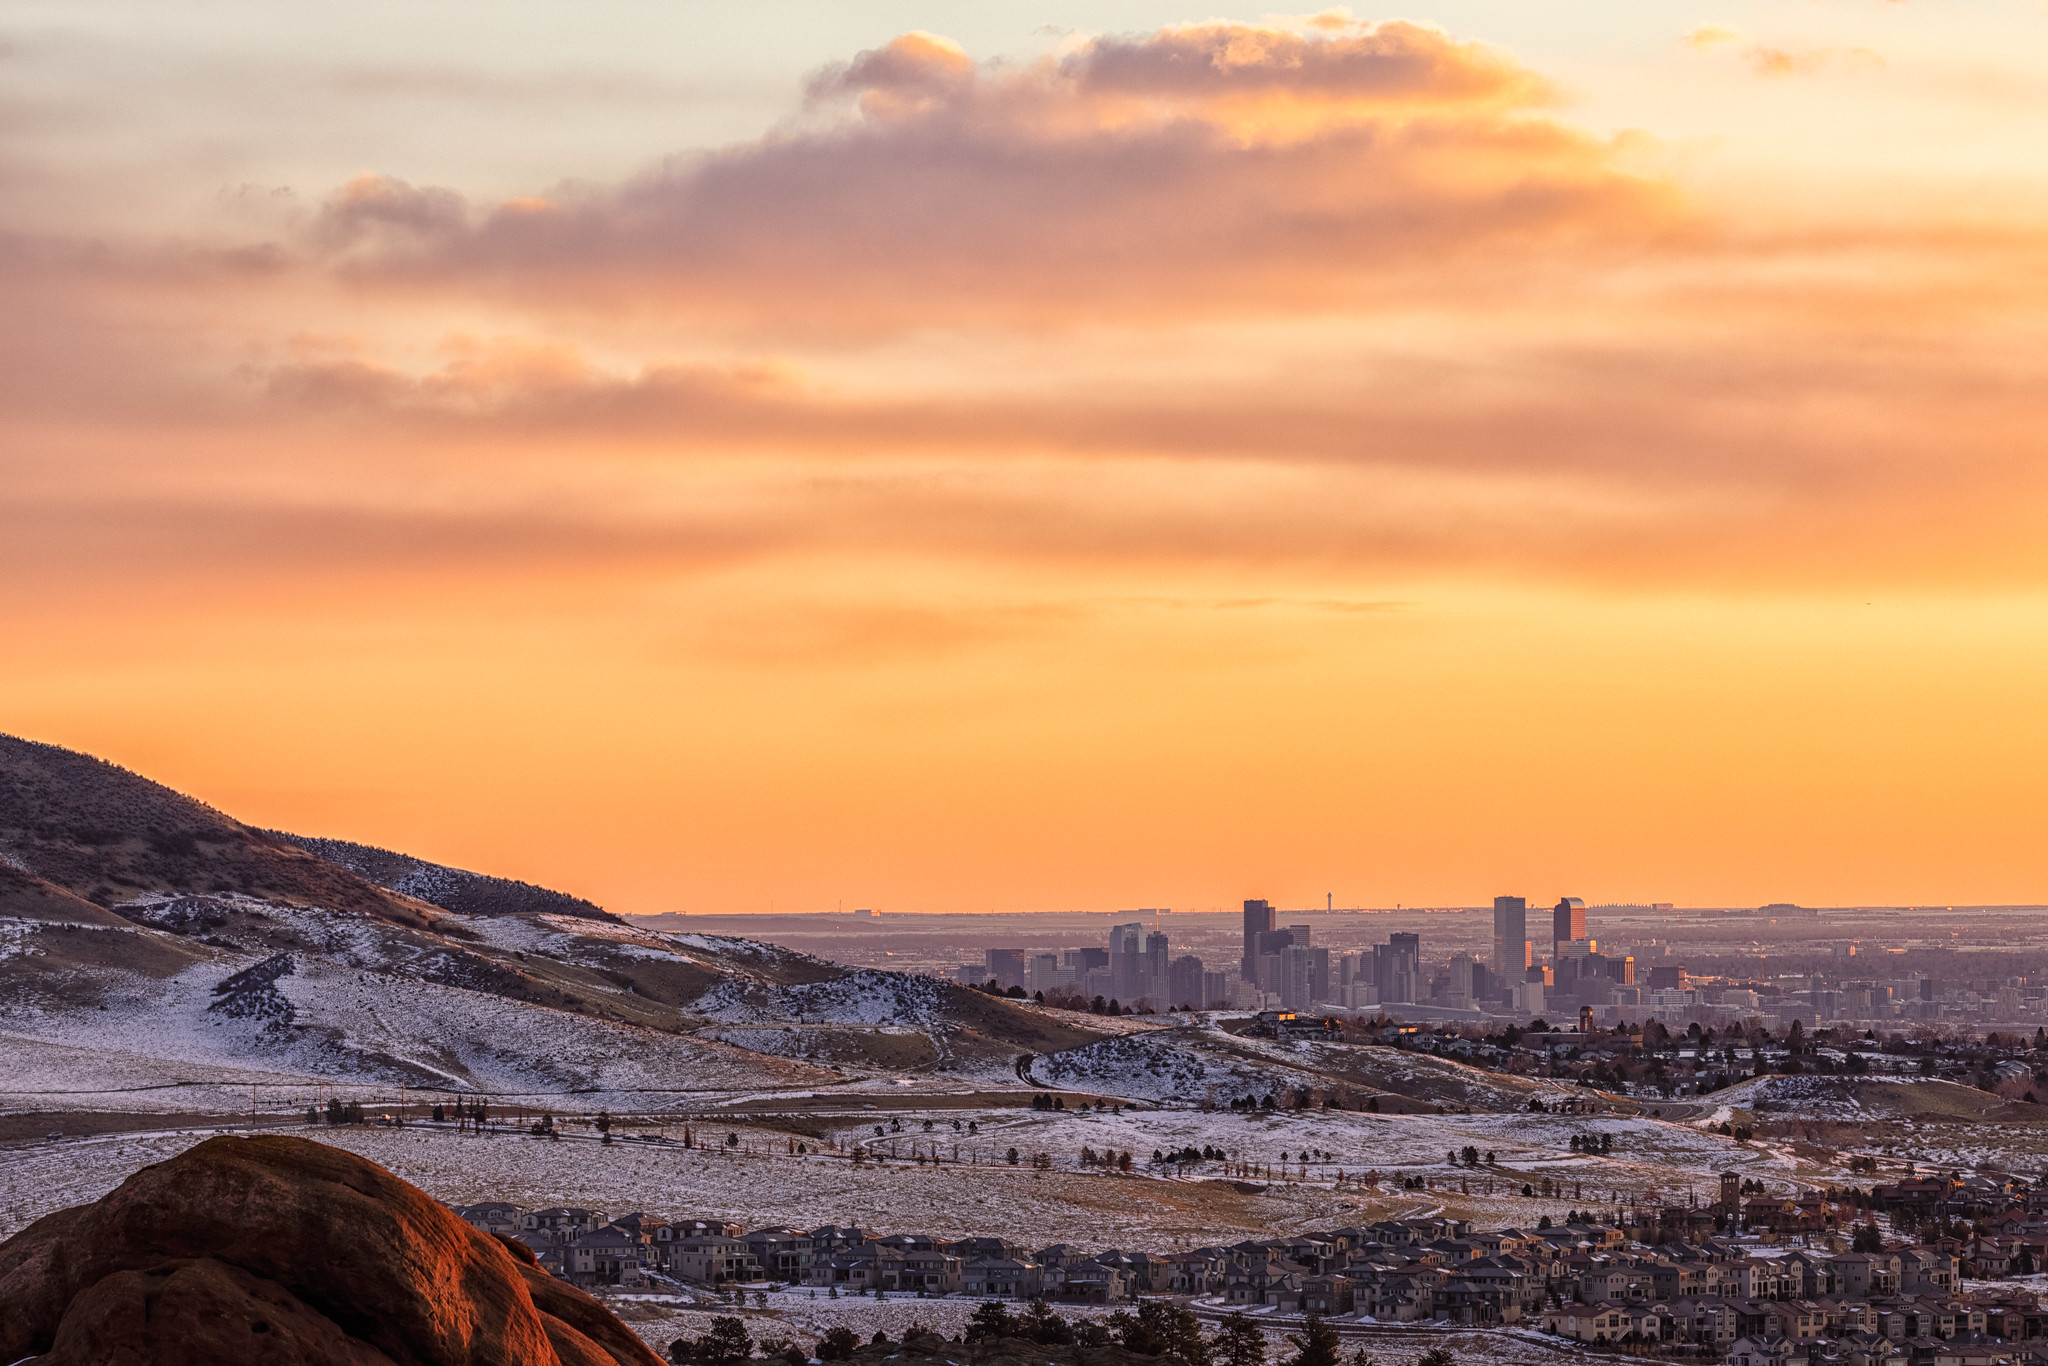 A distant view of Denver, Colorado showing suburban homes encroaching on the Rocky Mountain foothills with a yellow sunset in the background.